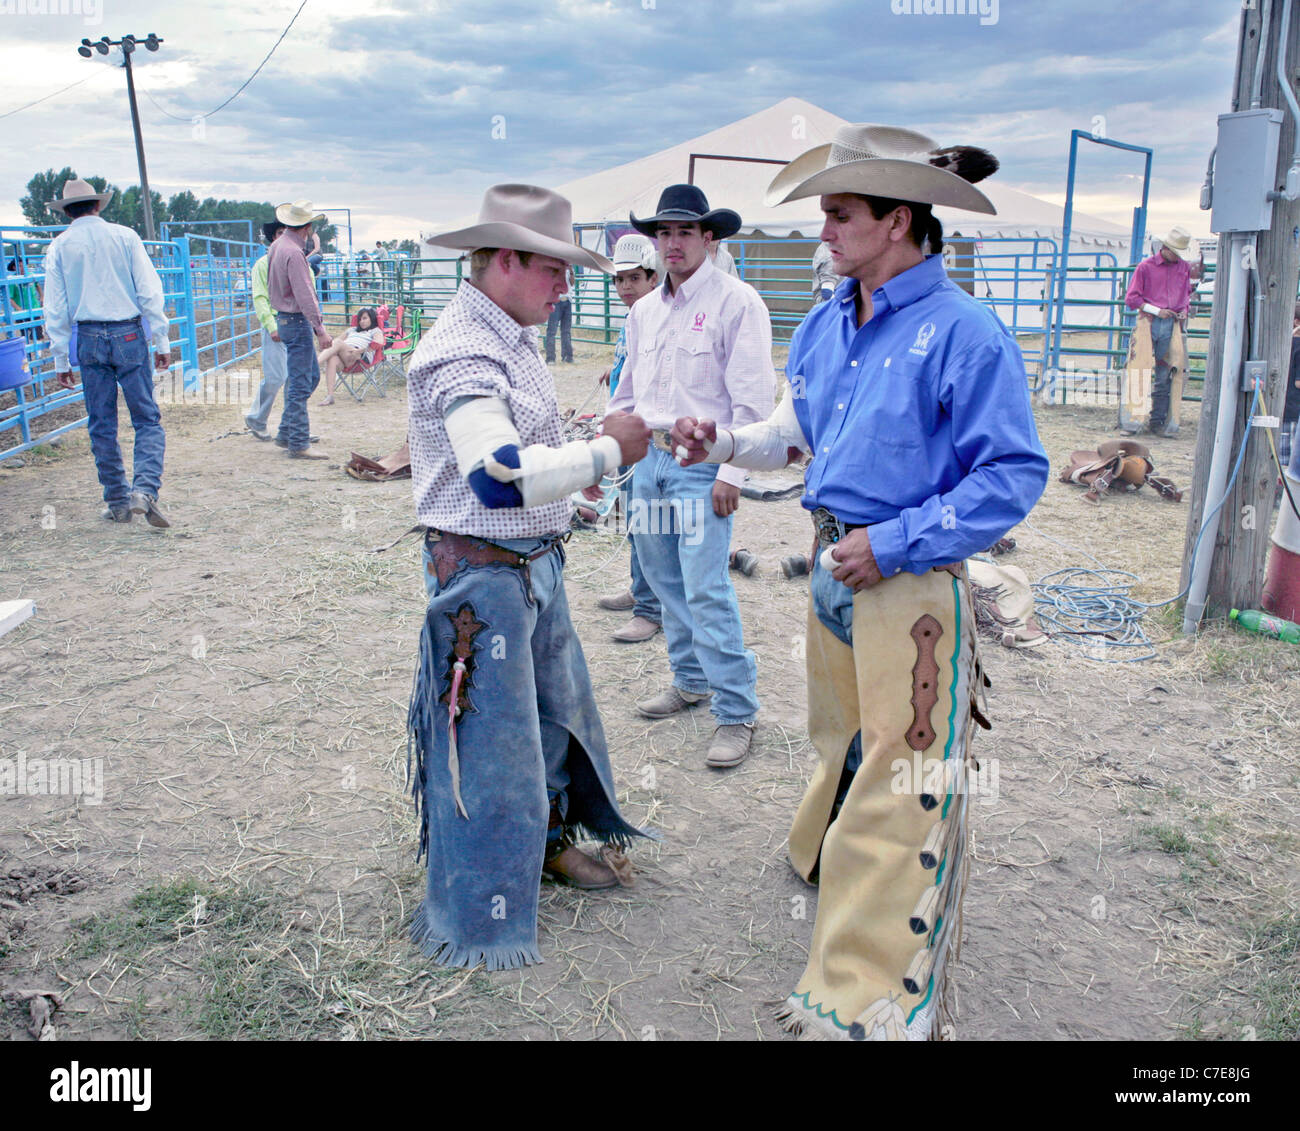 Competitors getting ready to take part in the bronco riding event of the rodeo held on the Fort Hall reservation in Wyoming. Stock Photo